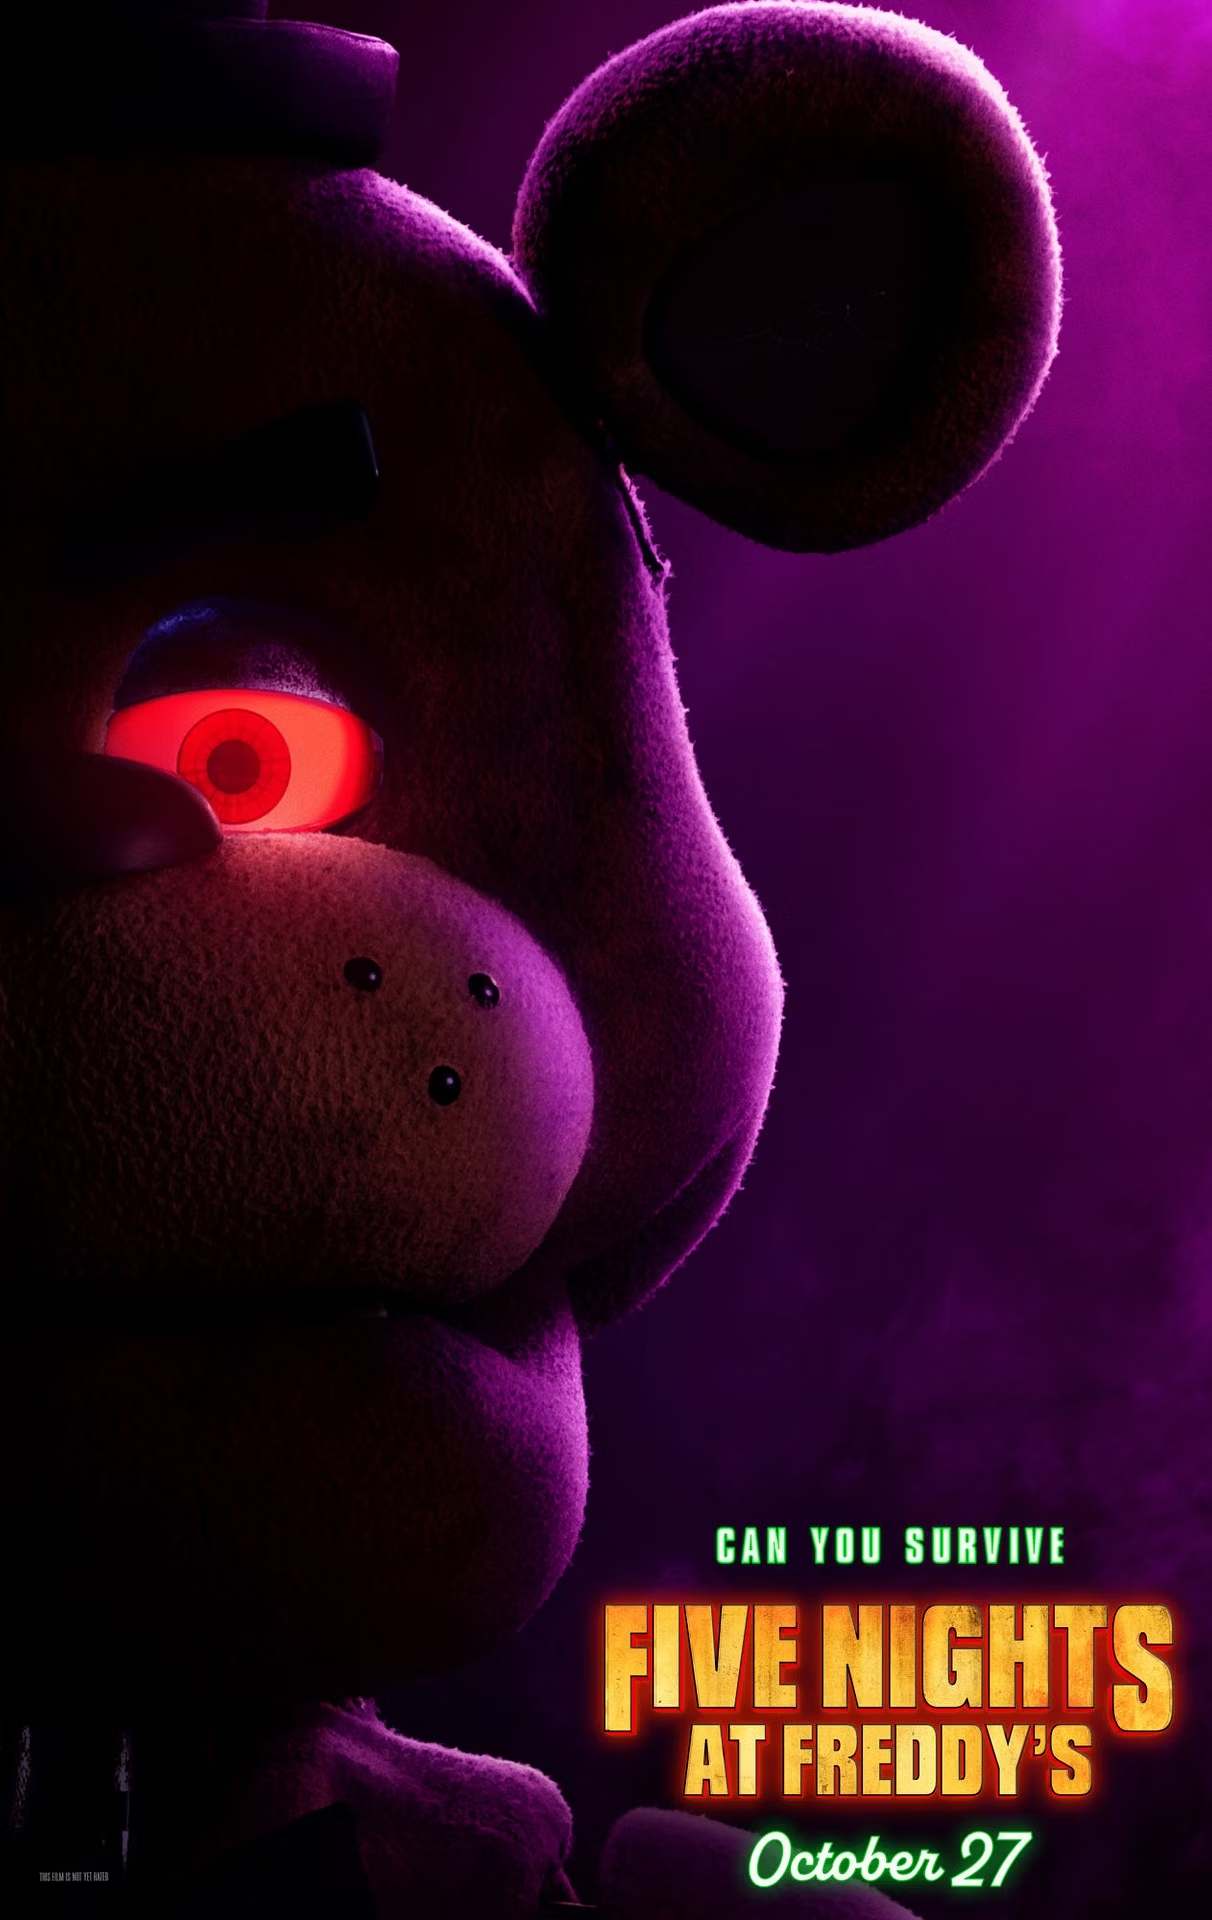 Five Nights at Freddys Teaser Poster 2